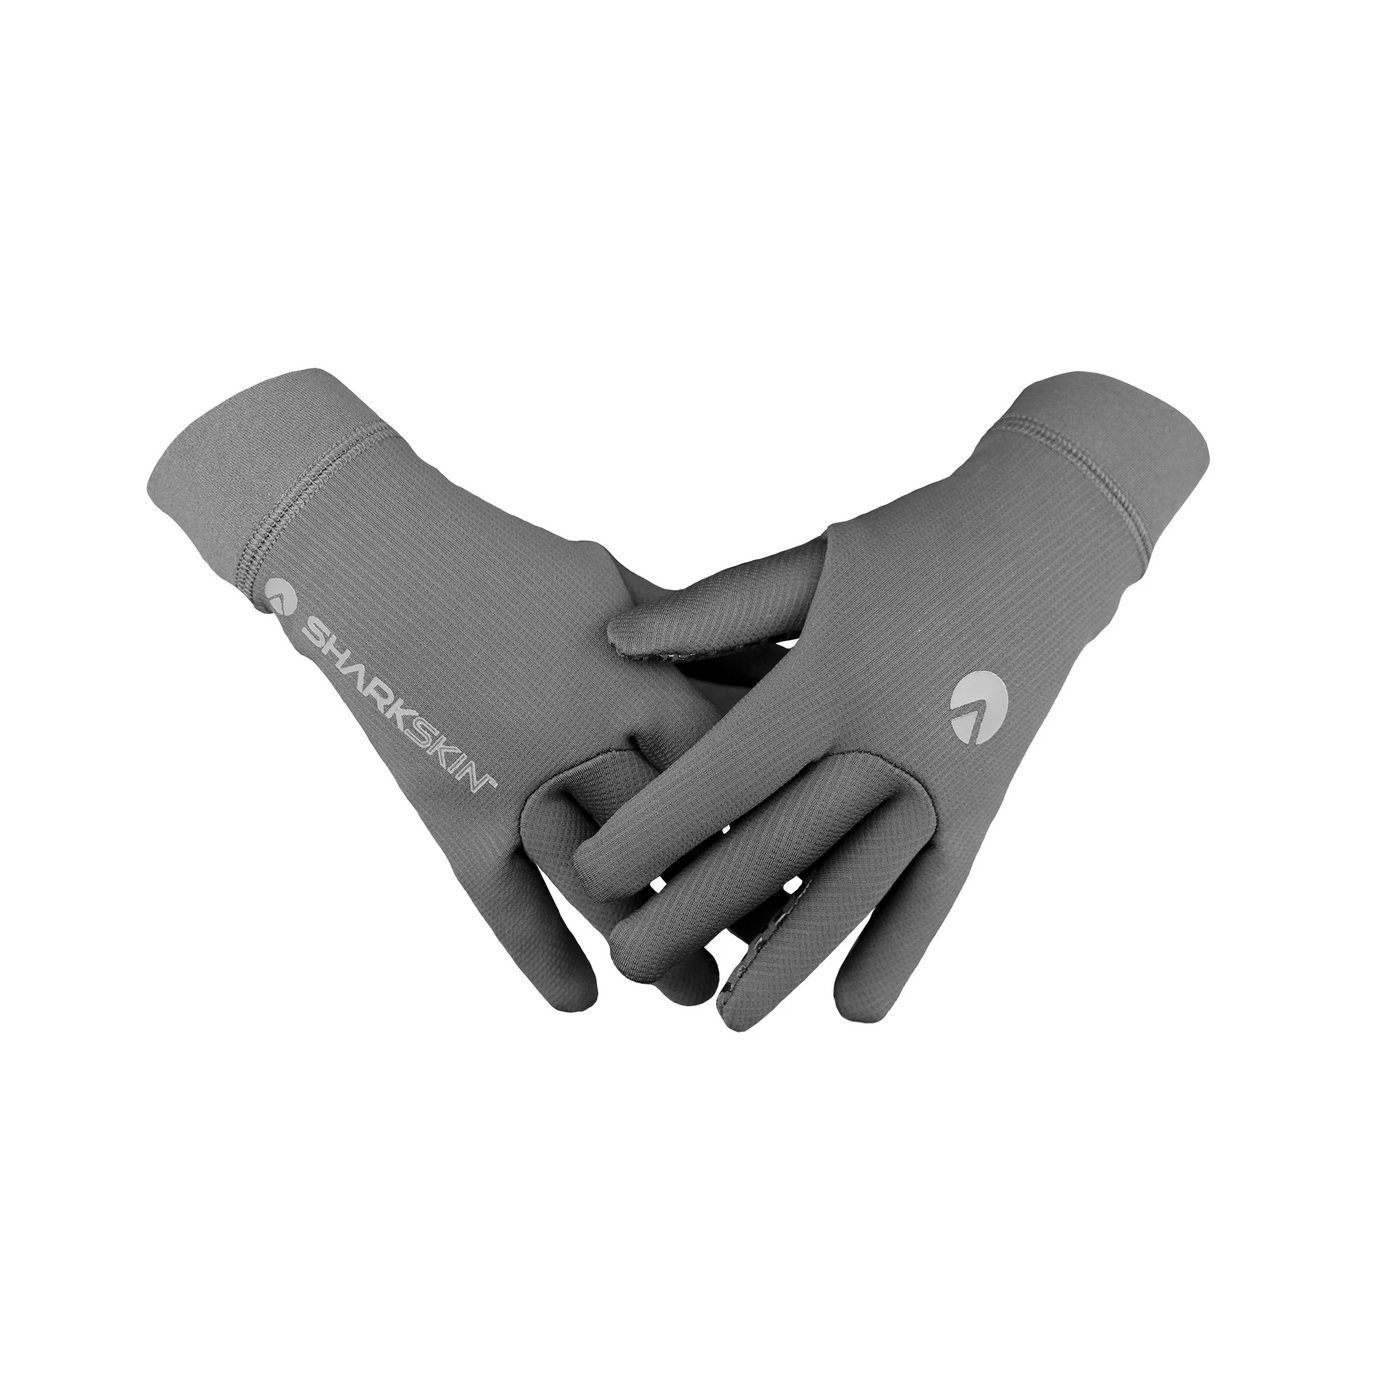 T2 CHILLPROOF GLOVE